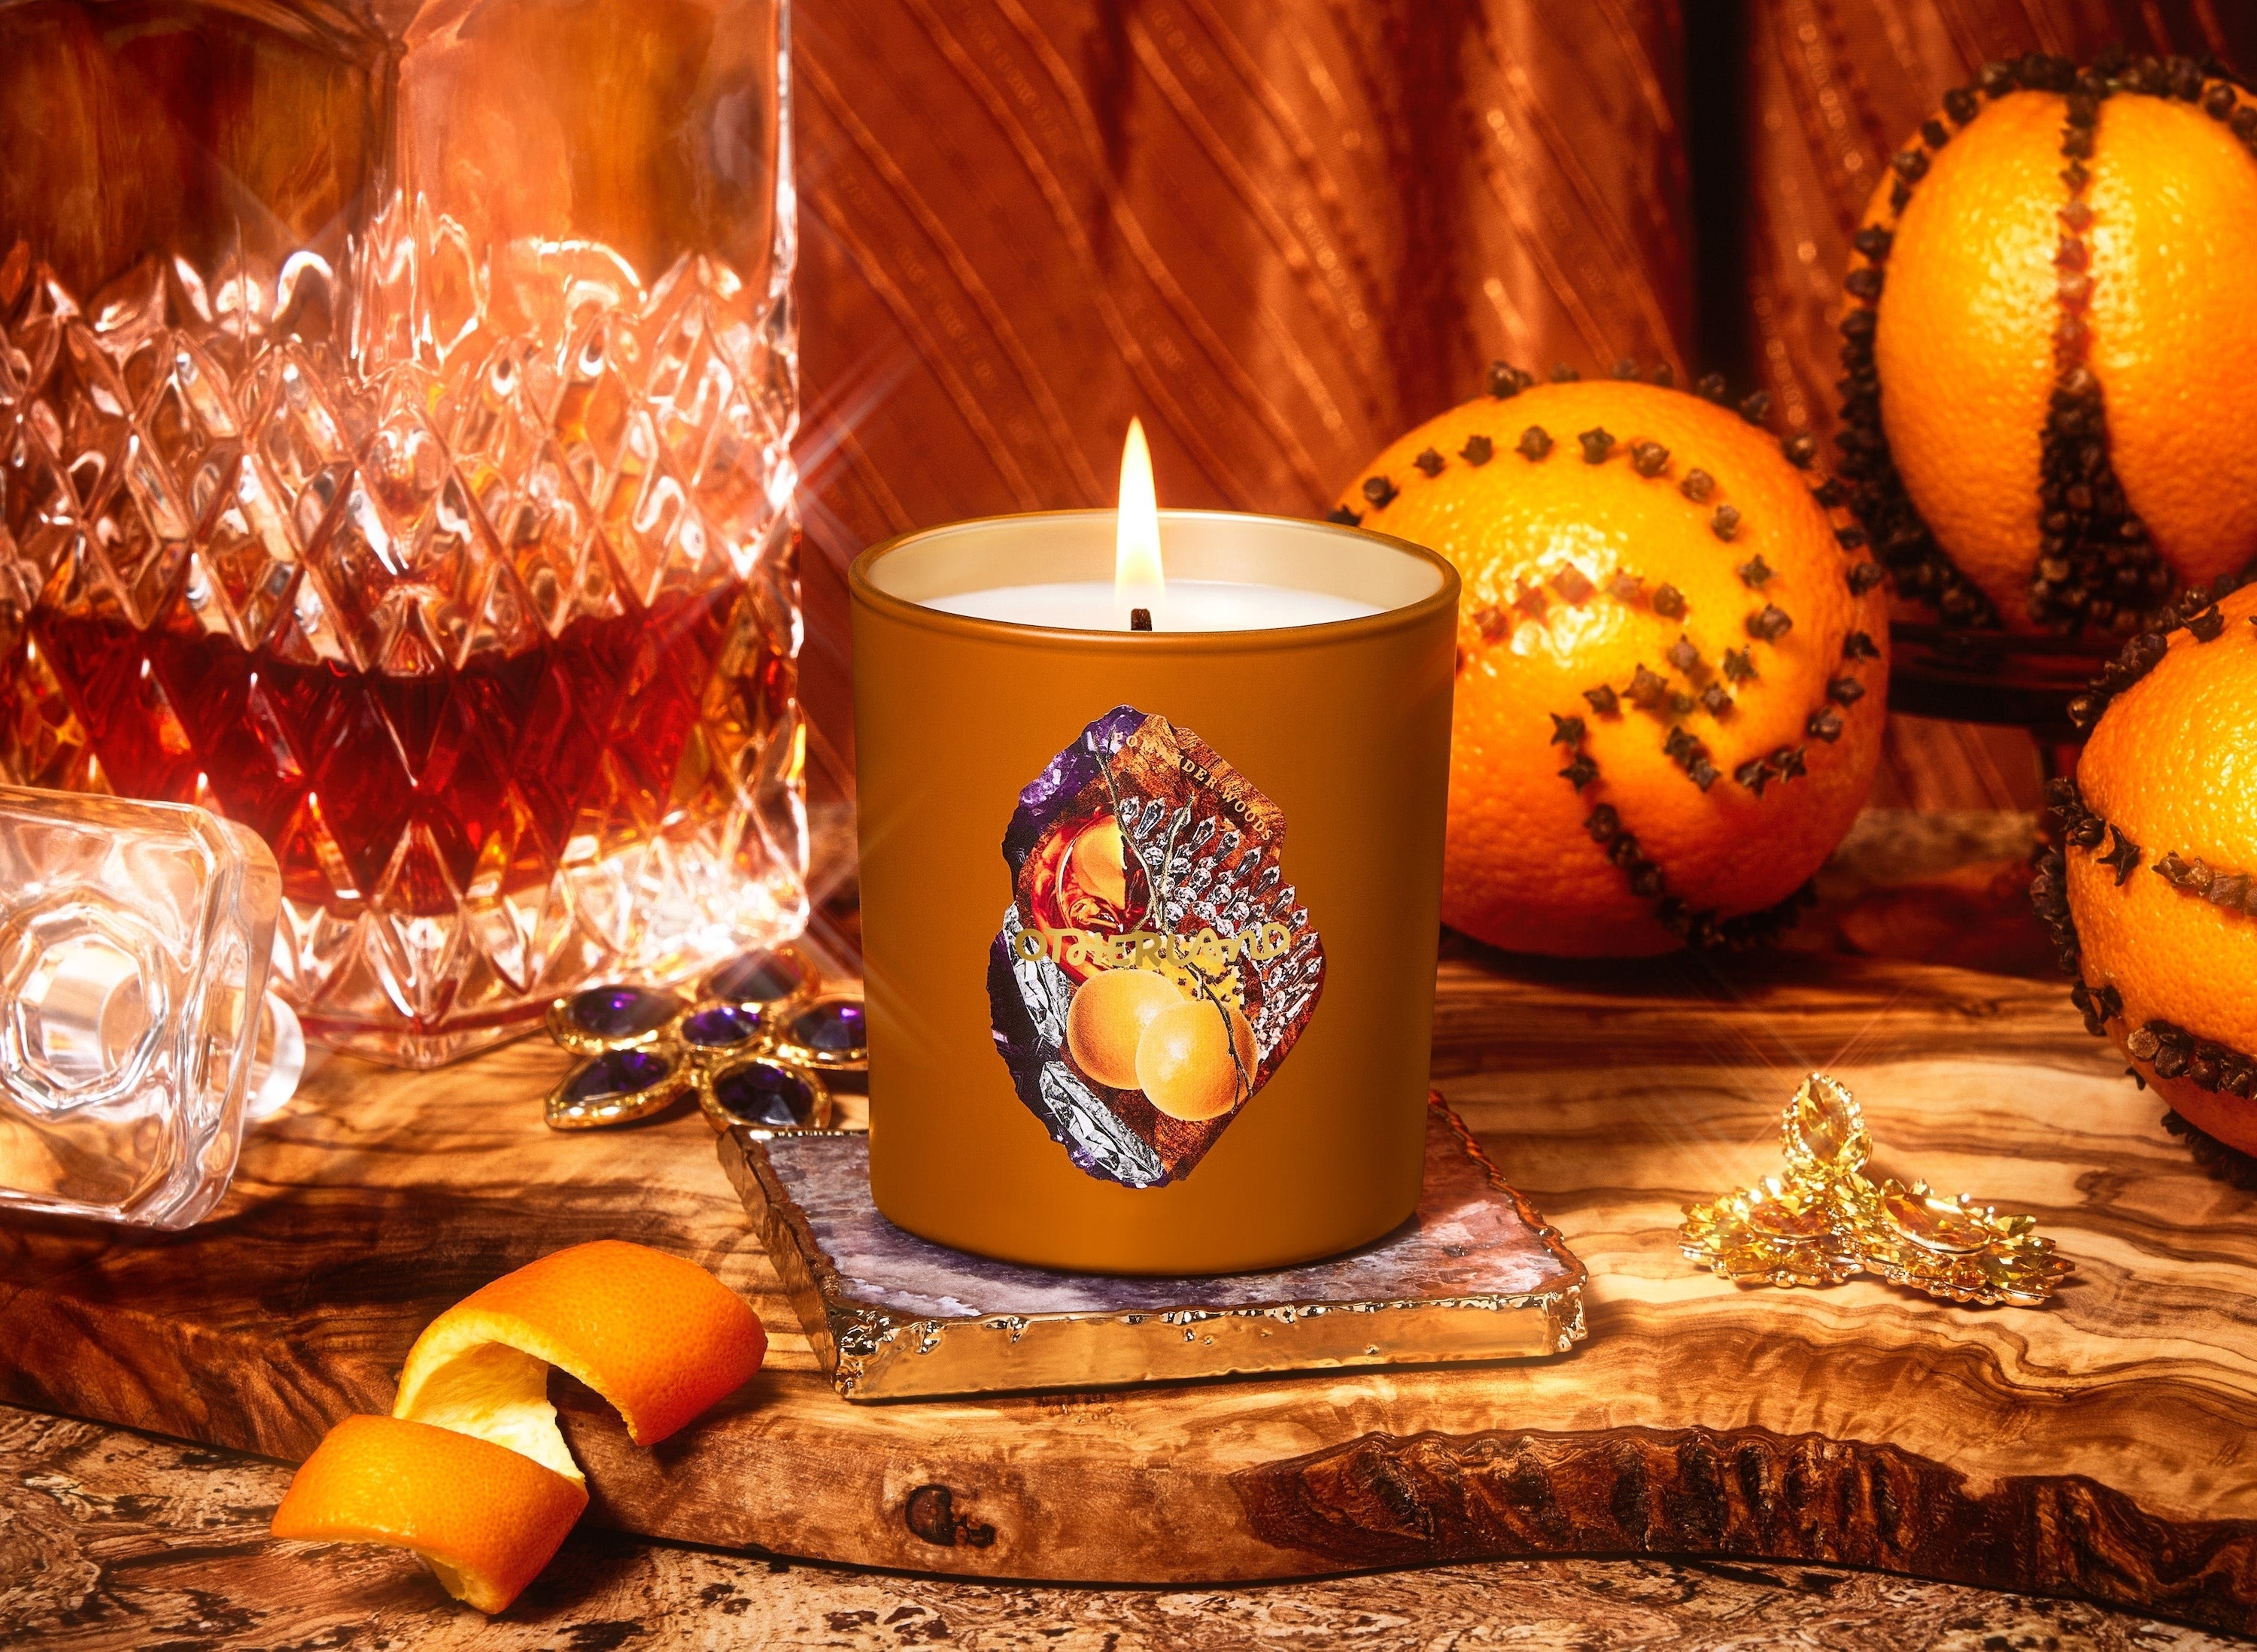 the pomander woods candle